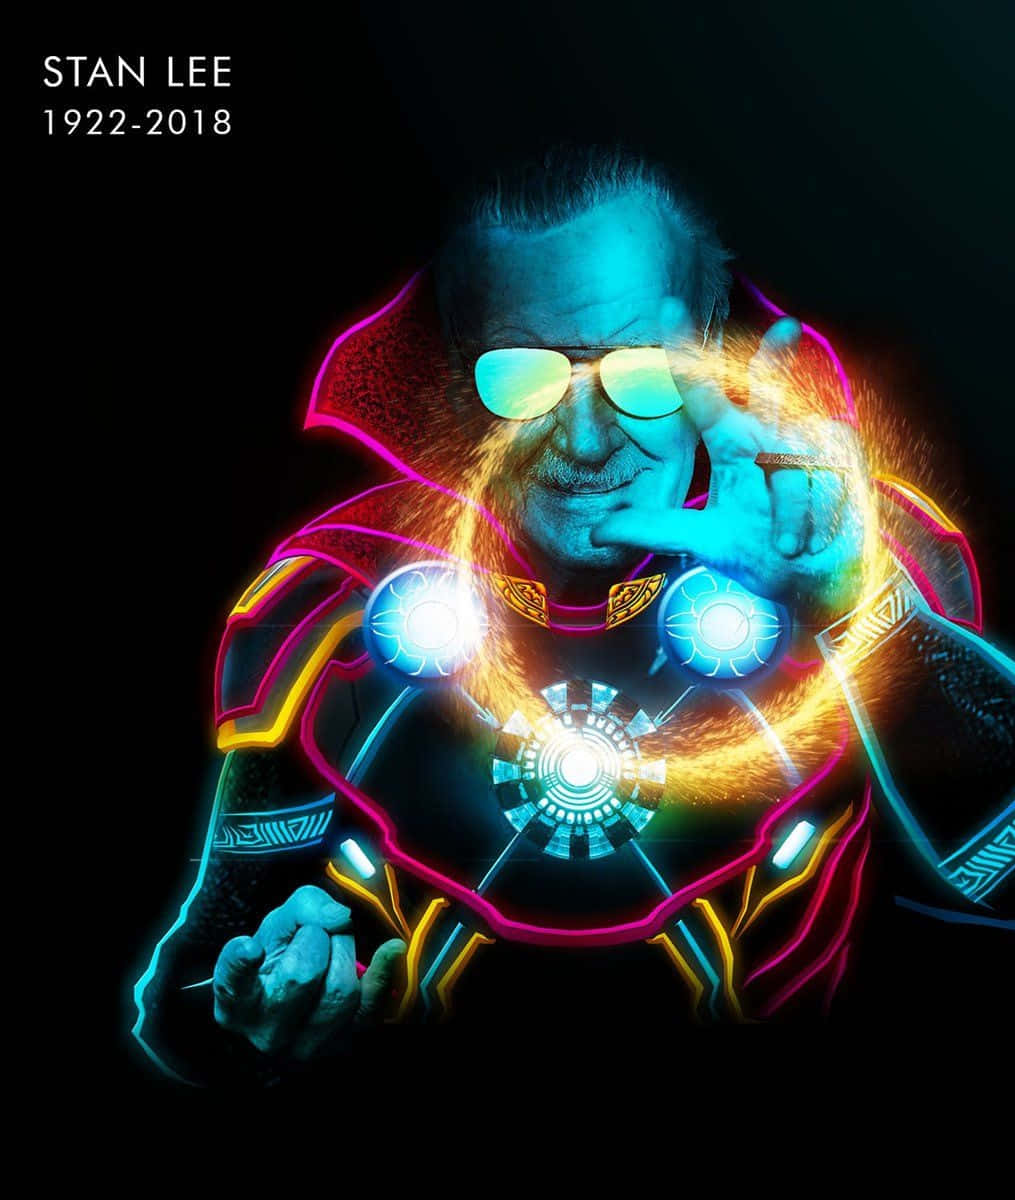 A Tribute to the memory of Stan Lee". Wallpaper